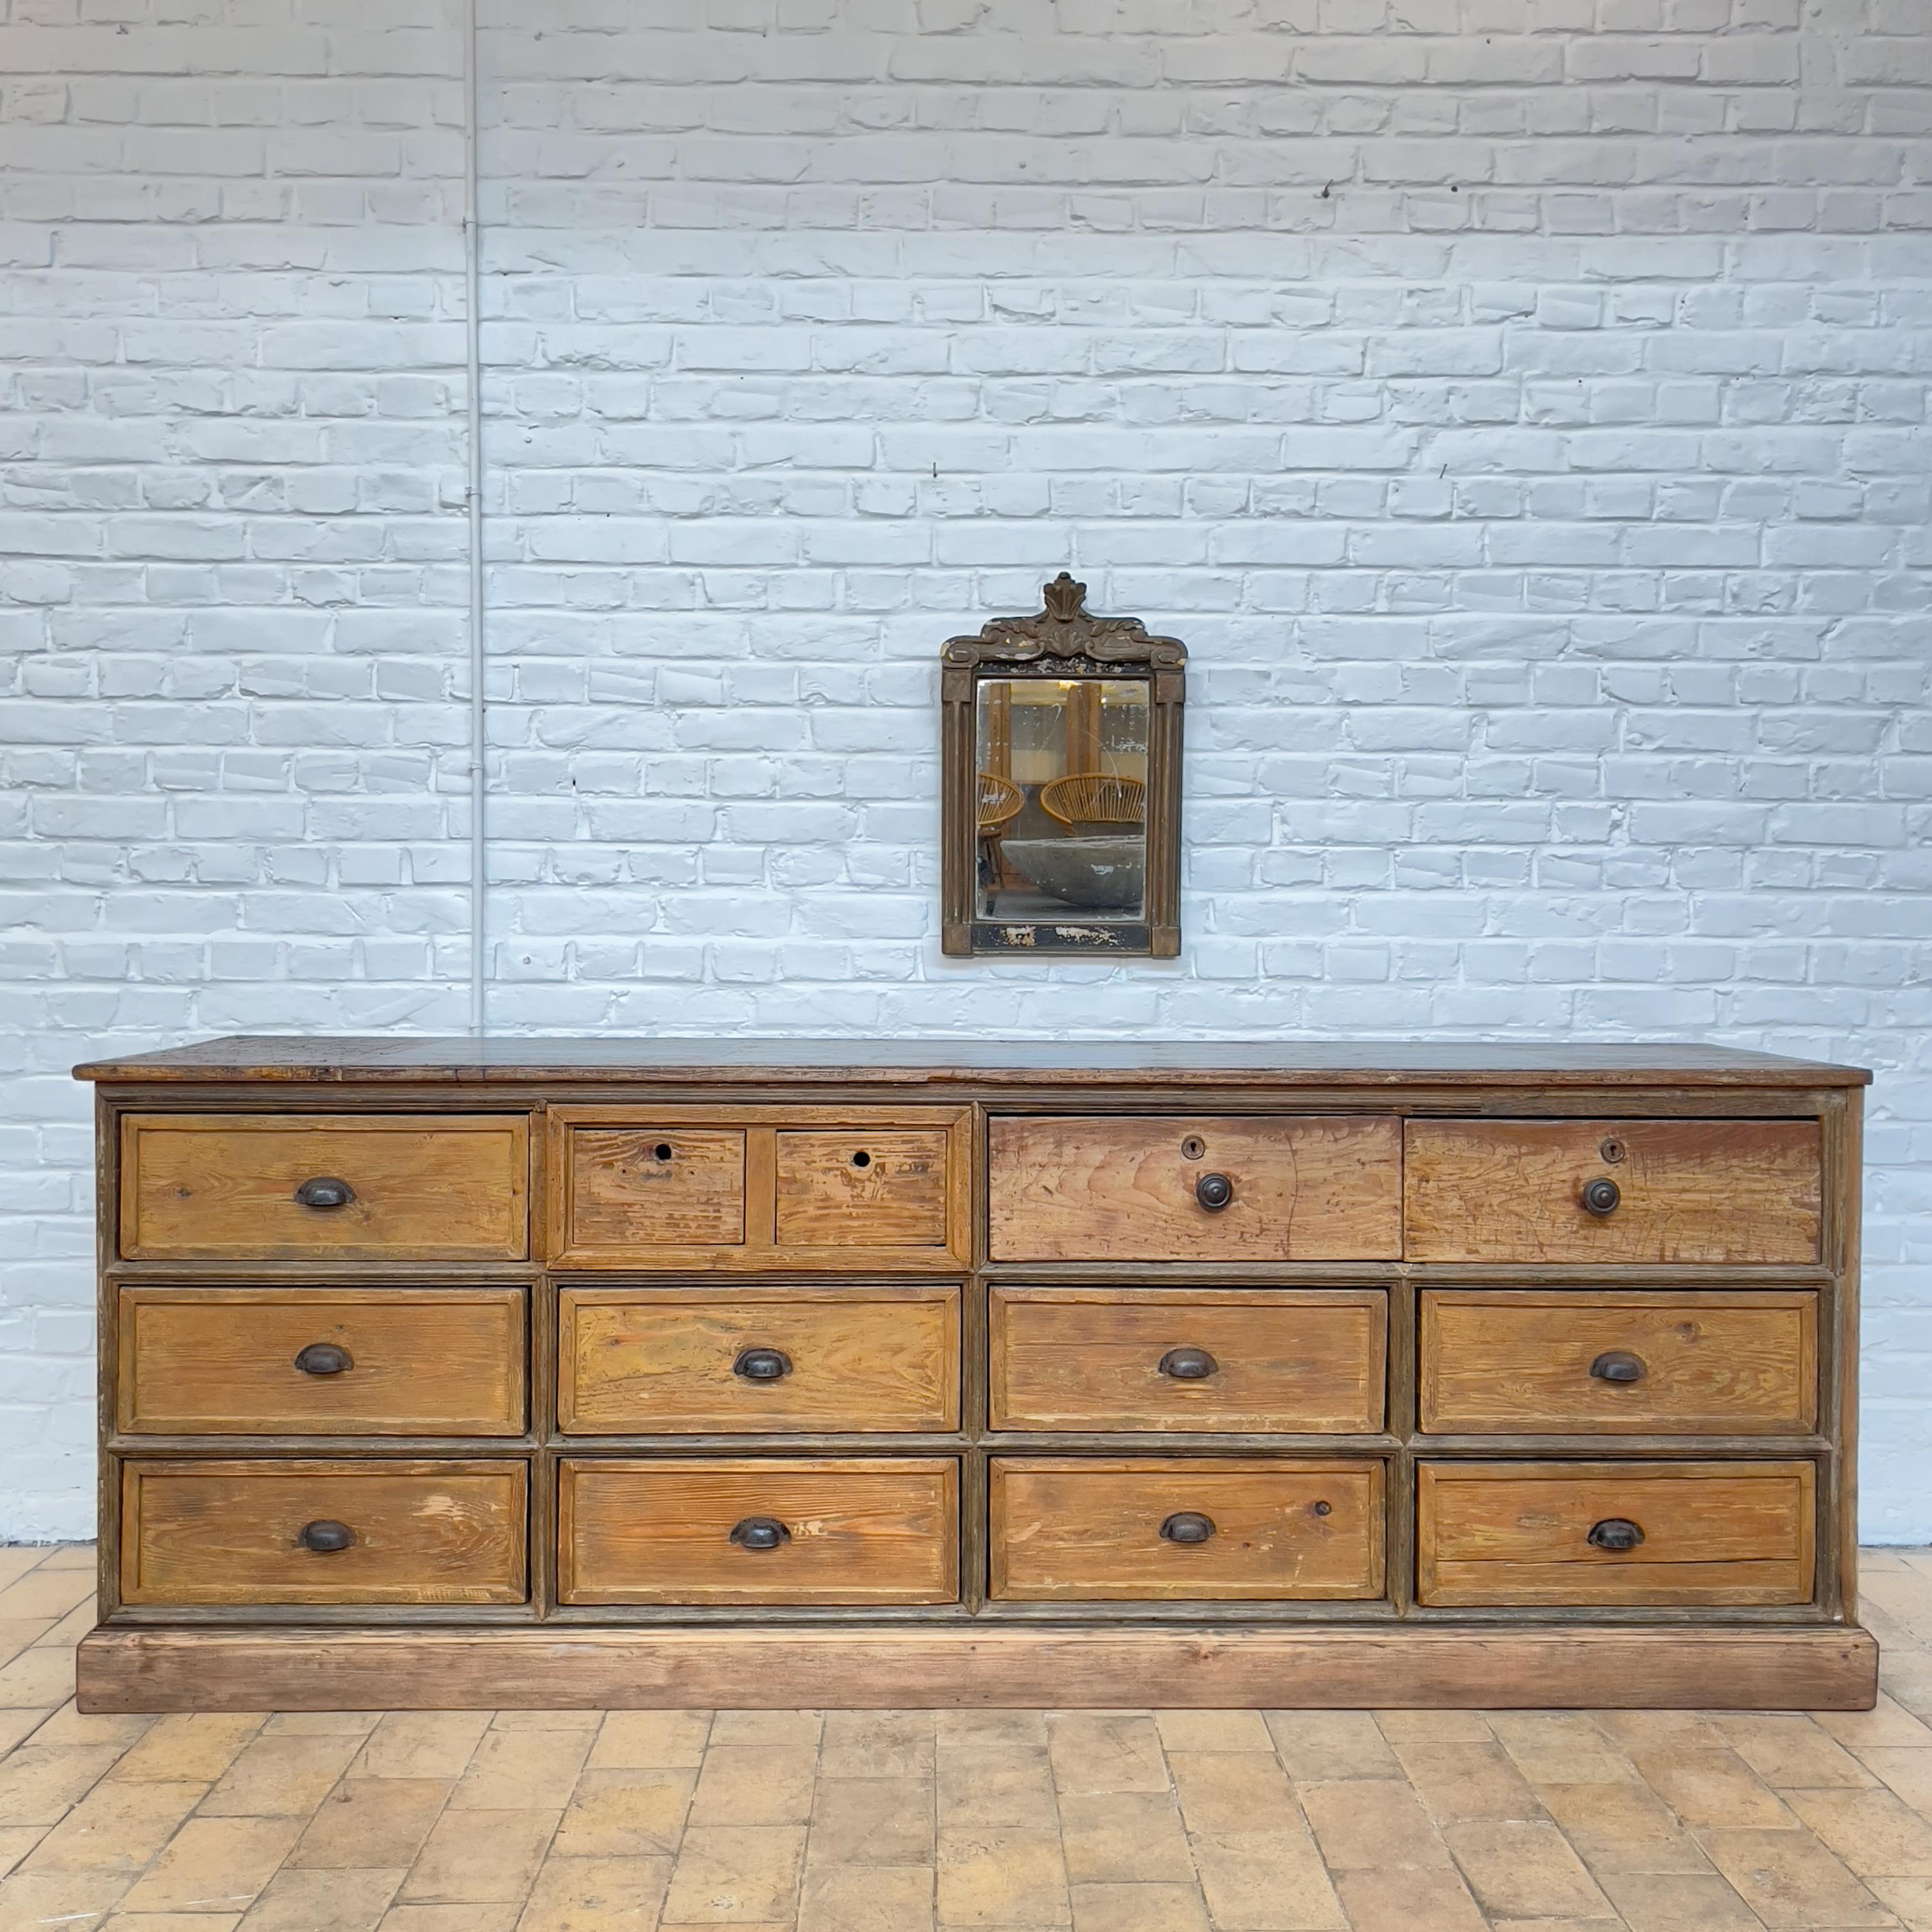 Early 20th Century French Haberdashery Cabinet with Drawers 1